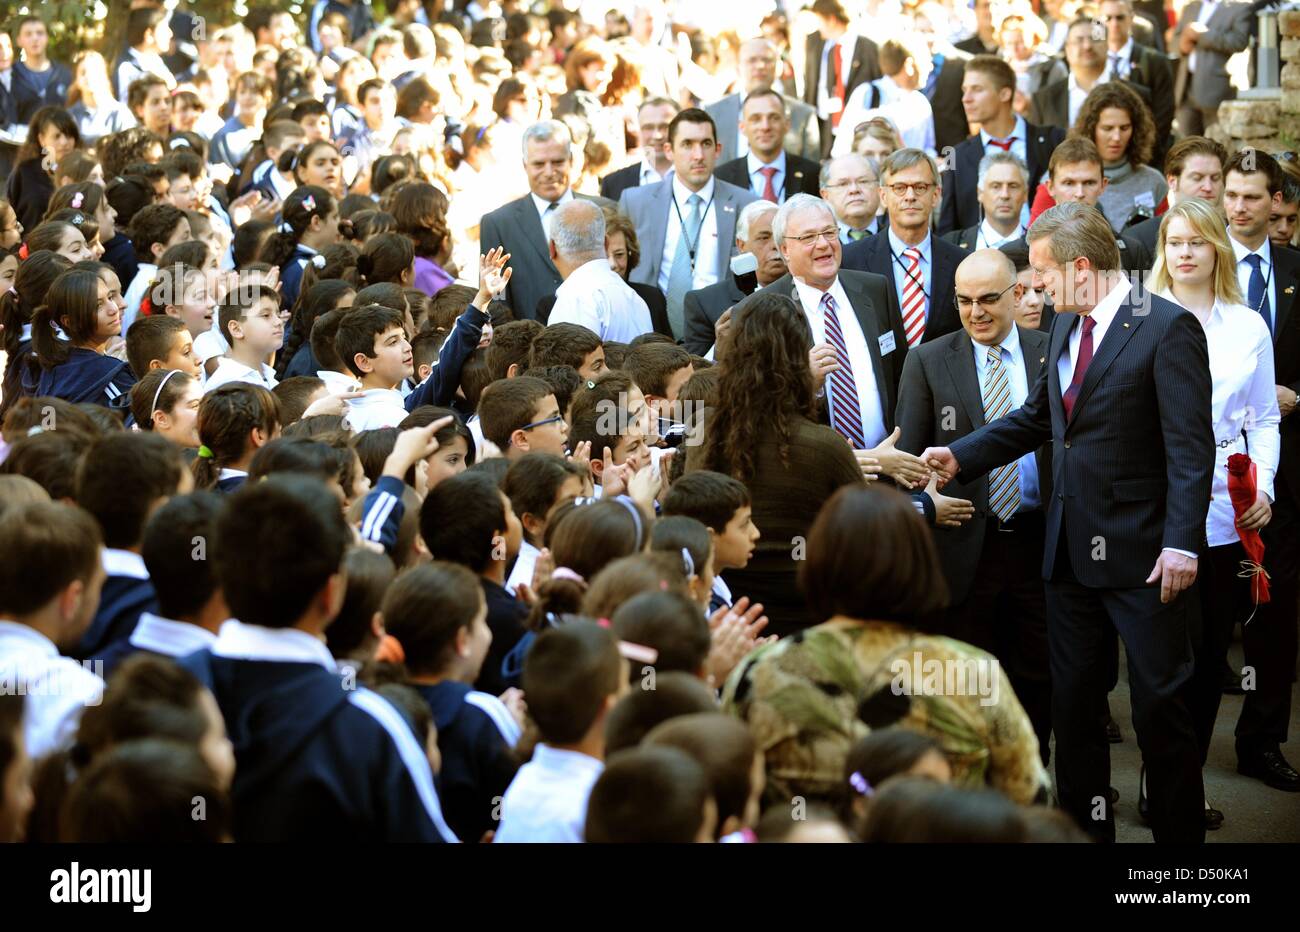 German President Christian Wulff (R) and his daughter Annalena visit the Talitha Kumi Lutheran Secondary School in Bethlehem, Palestinian Territories, 30 November 2010. The four-day state visit of German President Wulff will end today with his visit to the Palestinian Territories. Photo: RAINER JENSEN Stock Photo